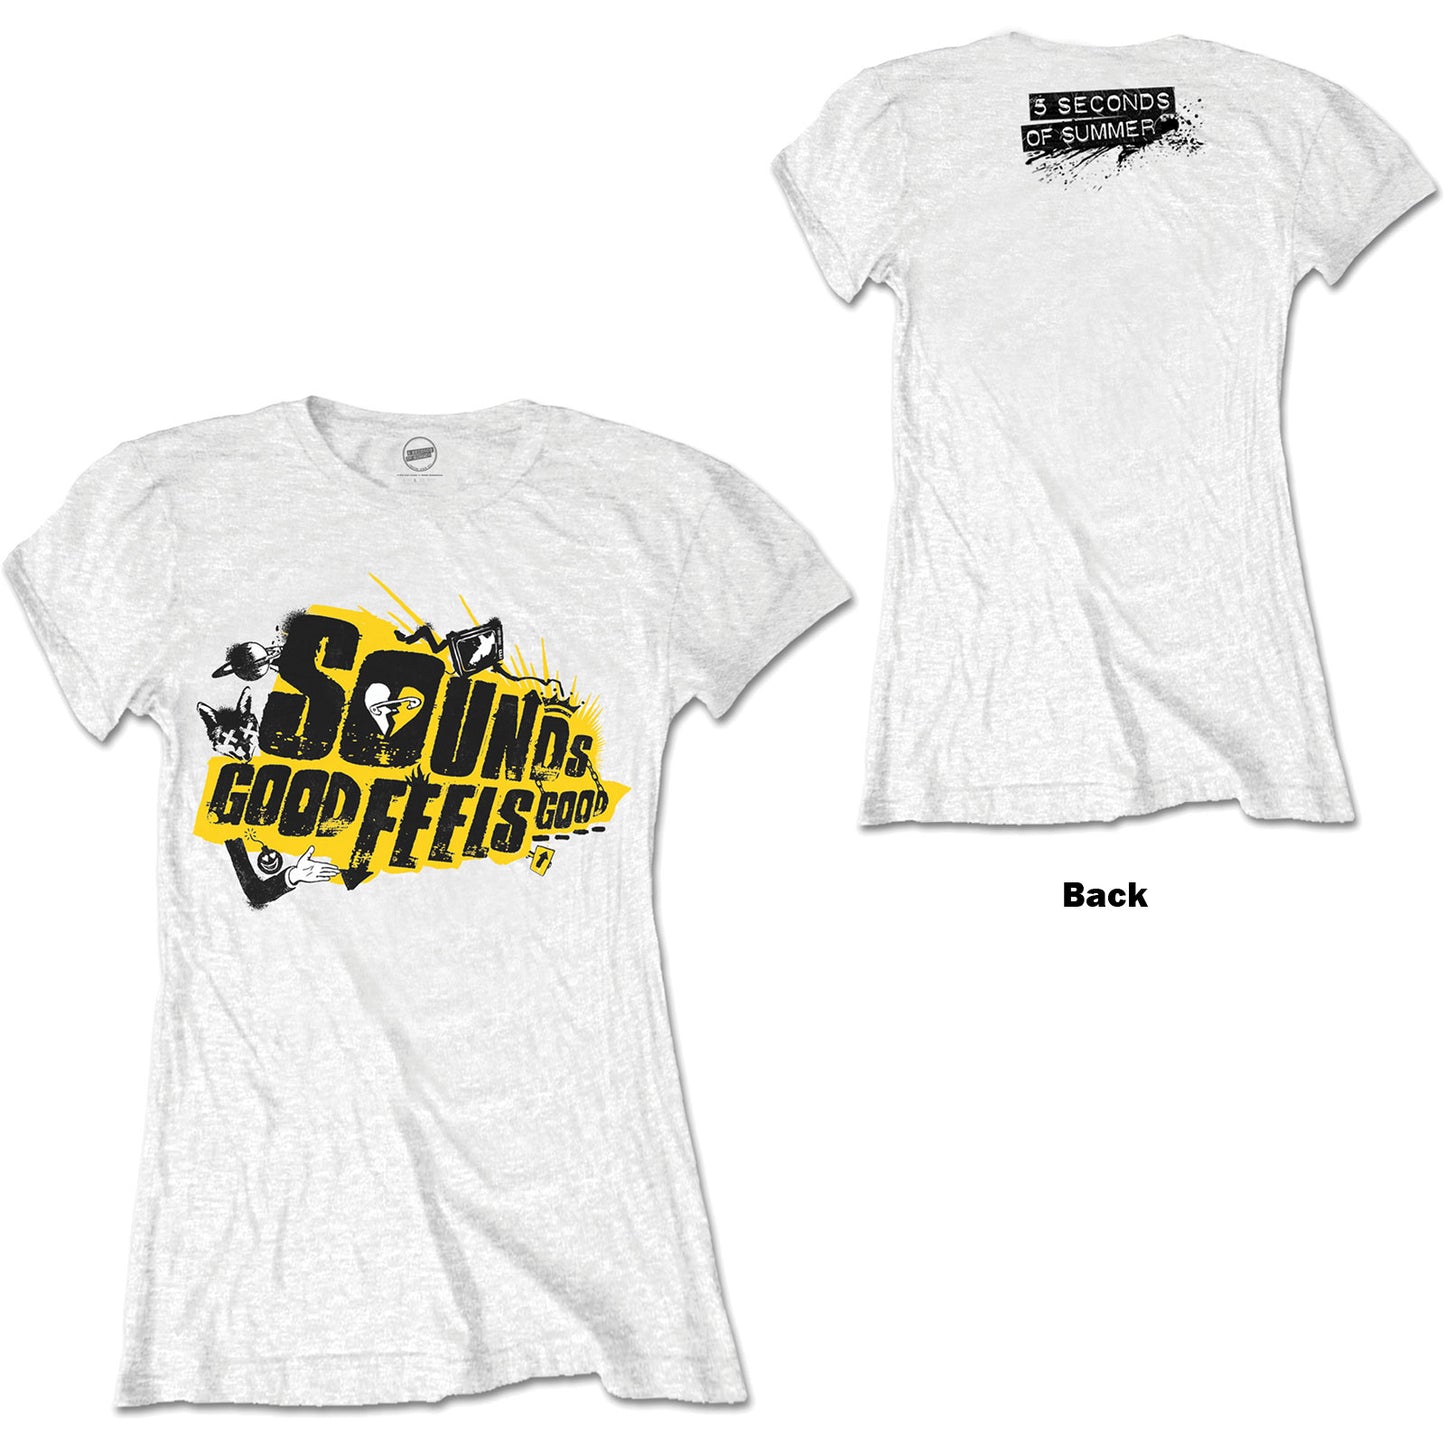 5 Seconds of Summer Ladies T-Shirt: Sounds Good Album (Skinny Fit)